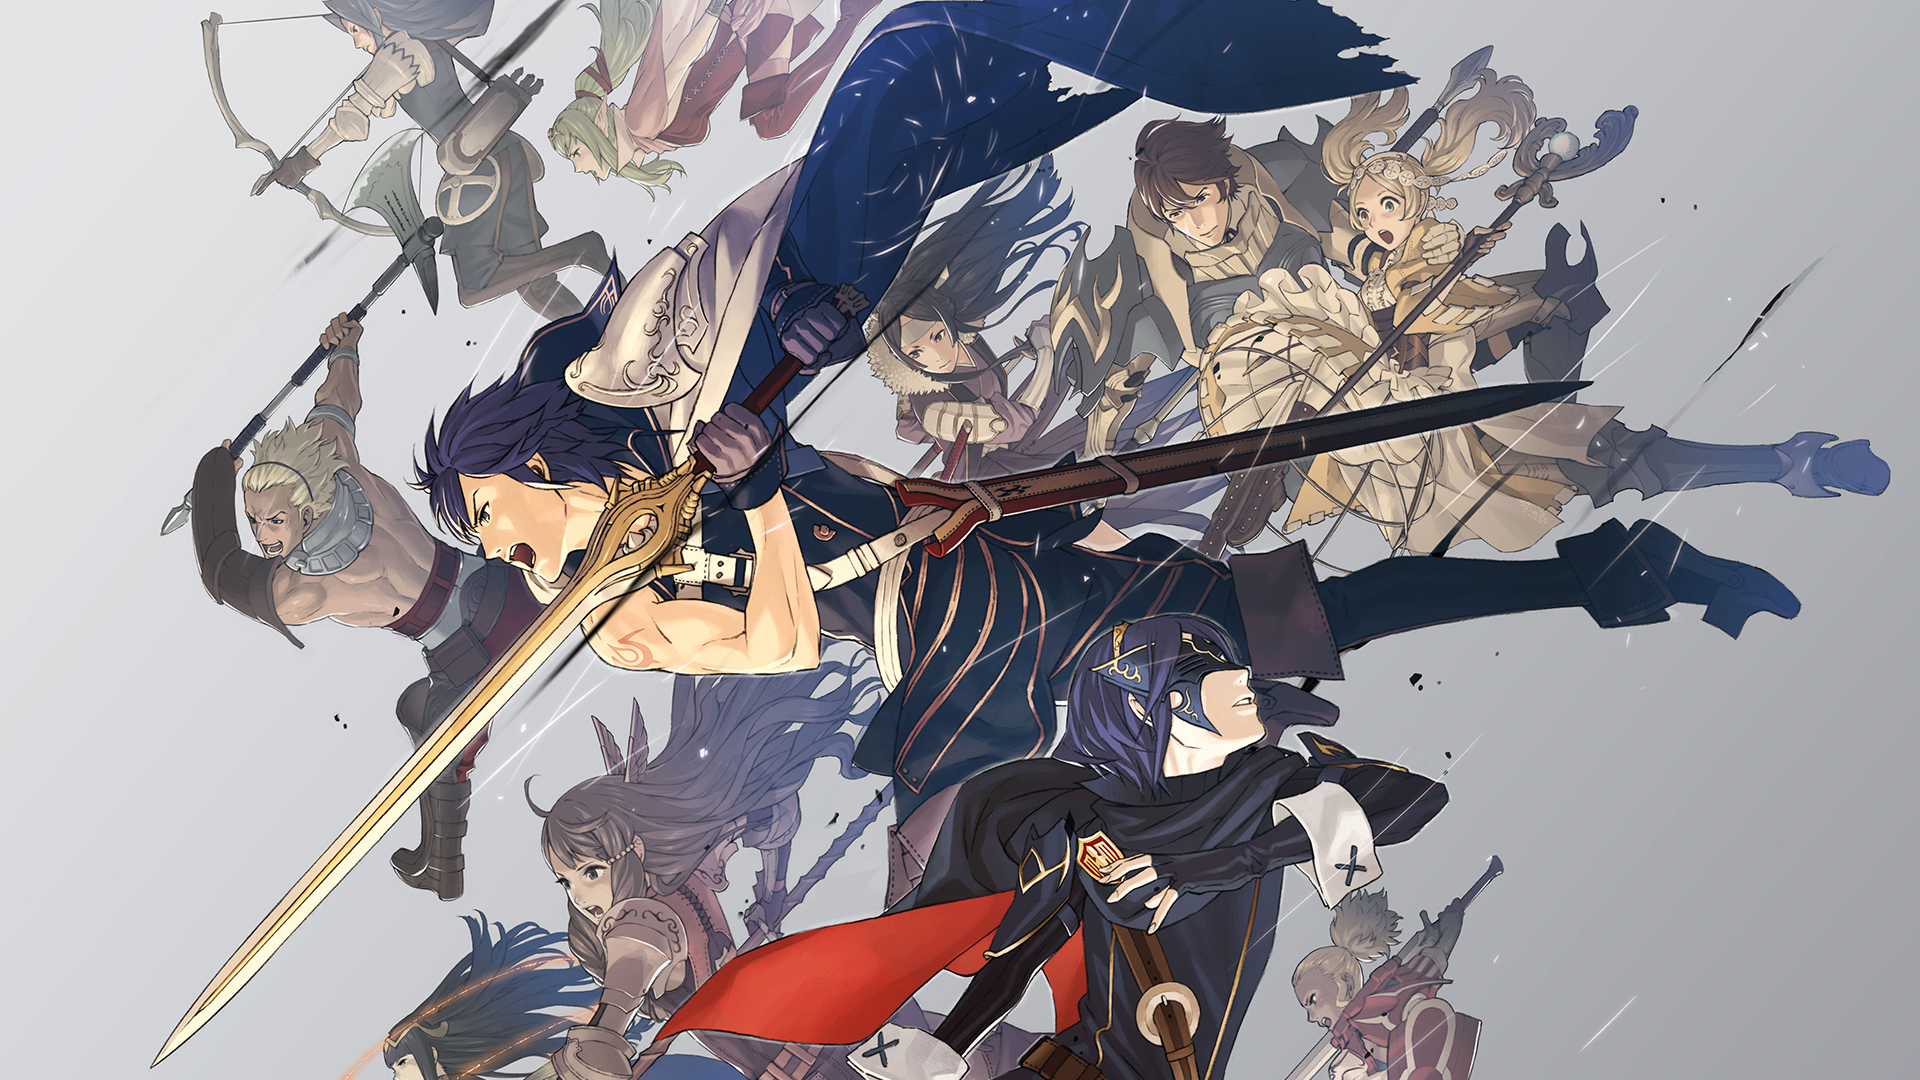 10 years later, Fire Emblem Awakening is still one of the greatest tactics games of all-time